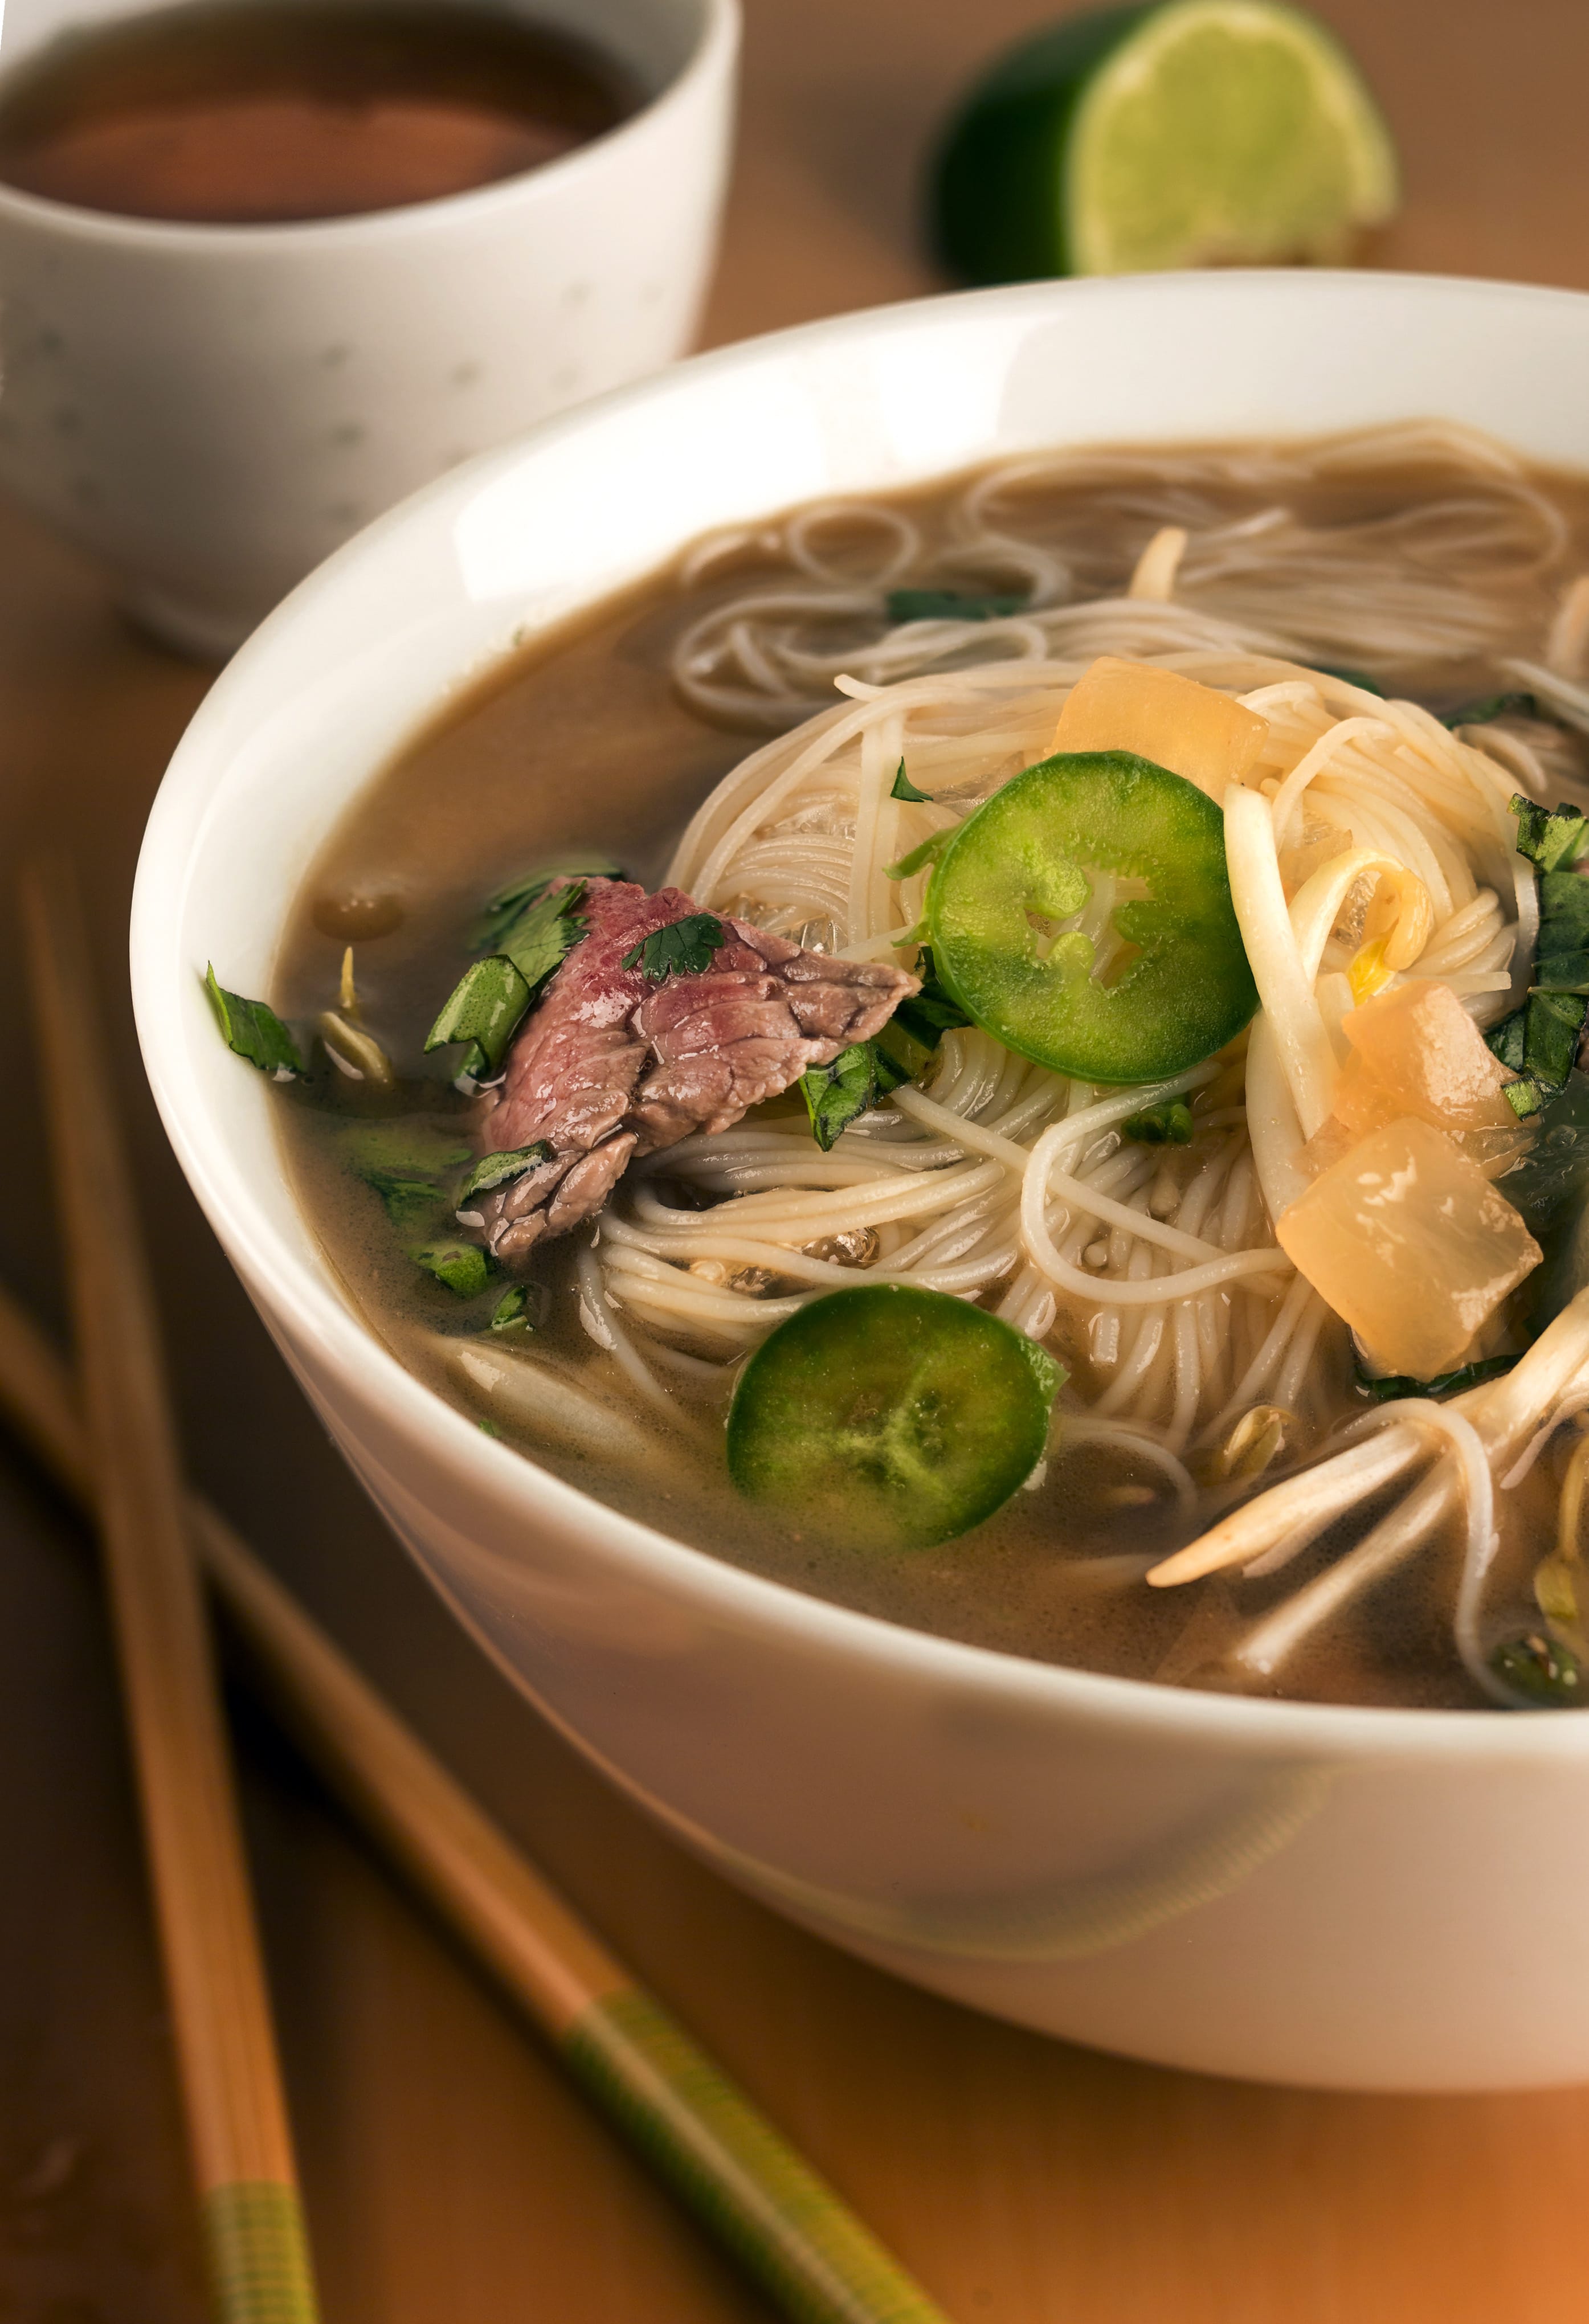 A variation in making Vietnamese pho is to substitute broth with rooibos chai tea.